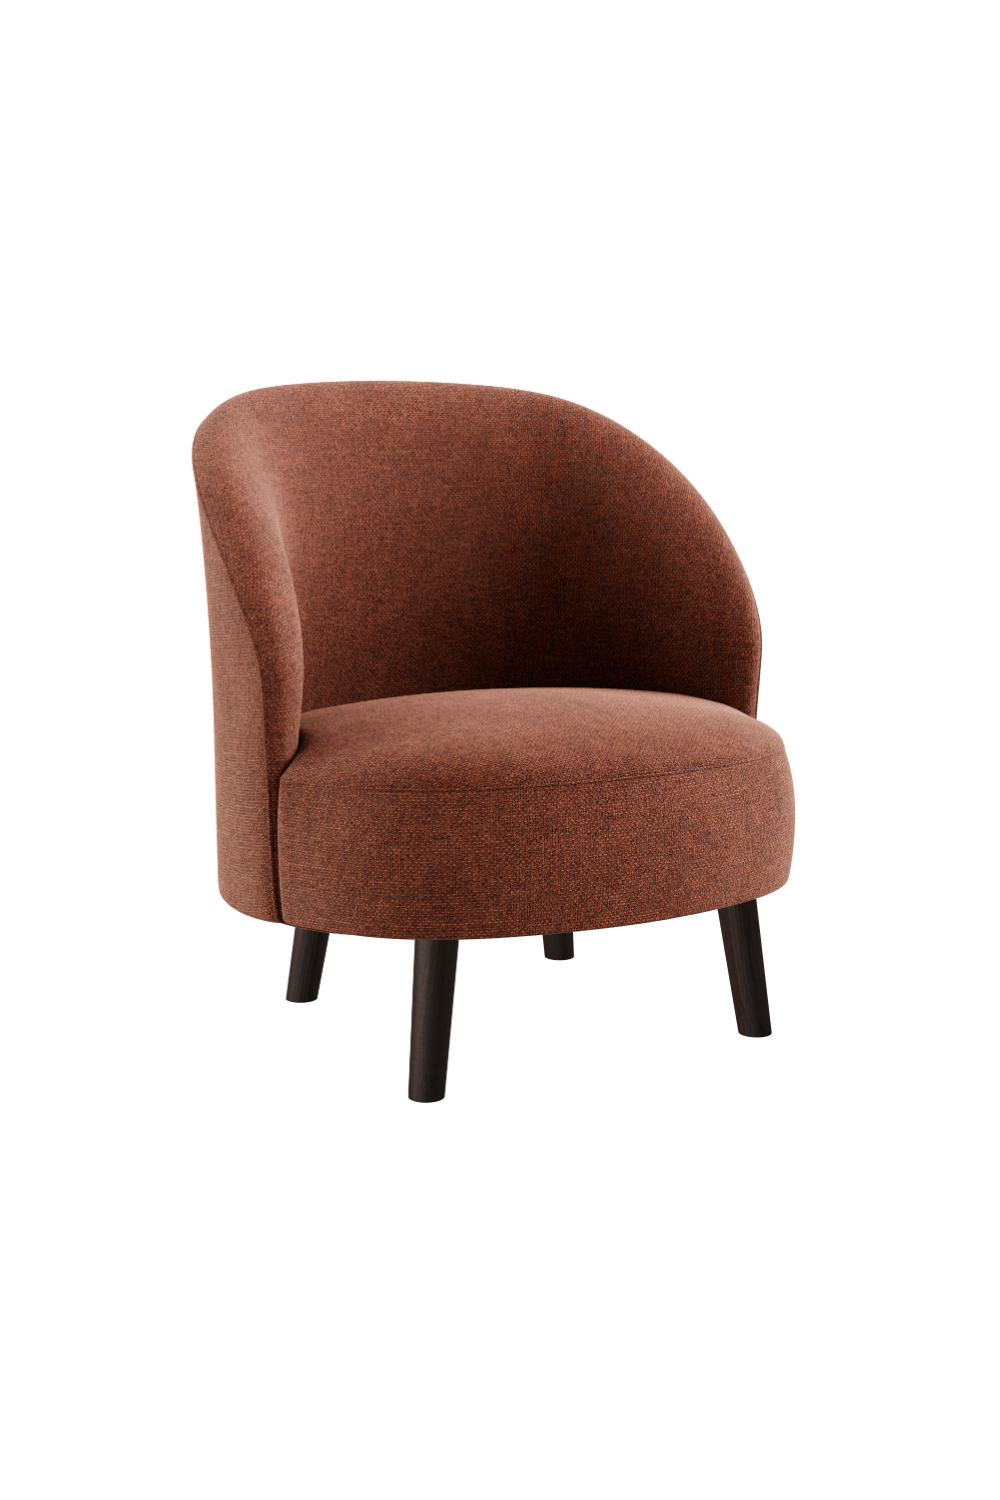 Curved Back Upholstered Lounge Chair | Dome Deco Bayron | Oroa.com